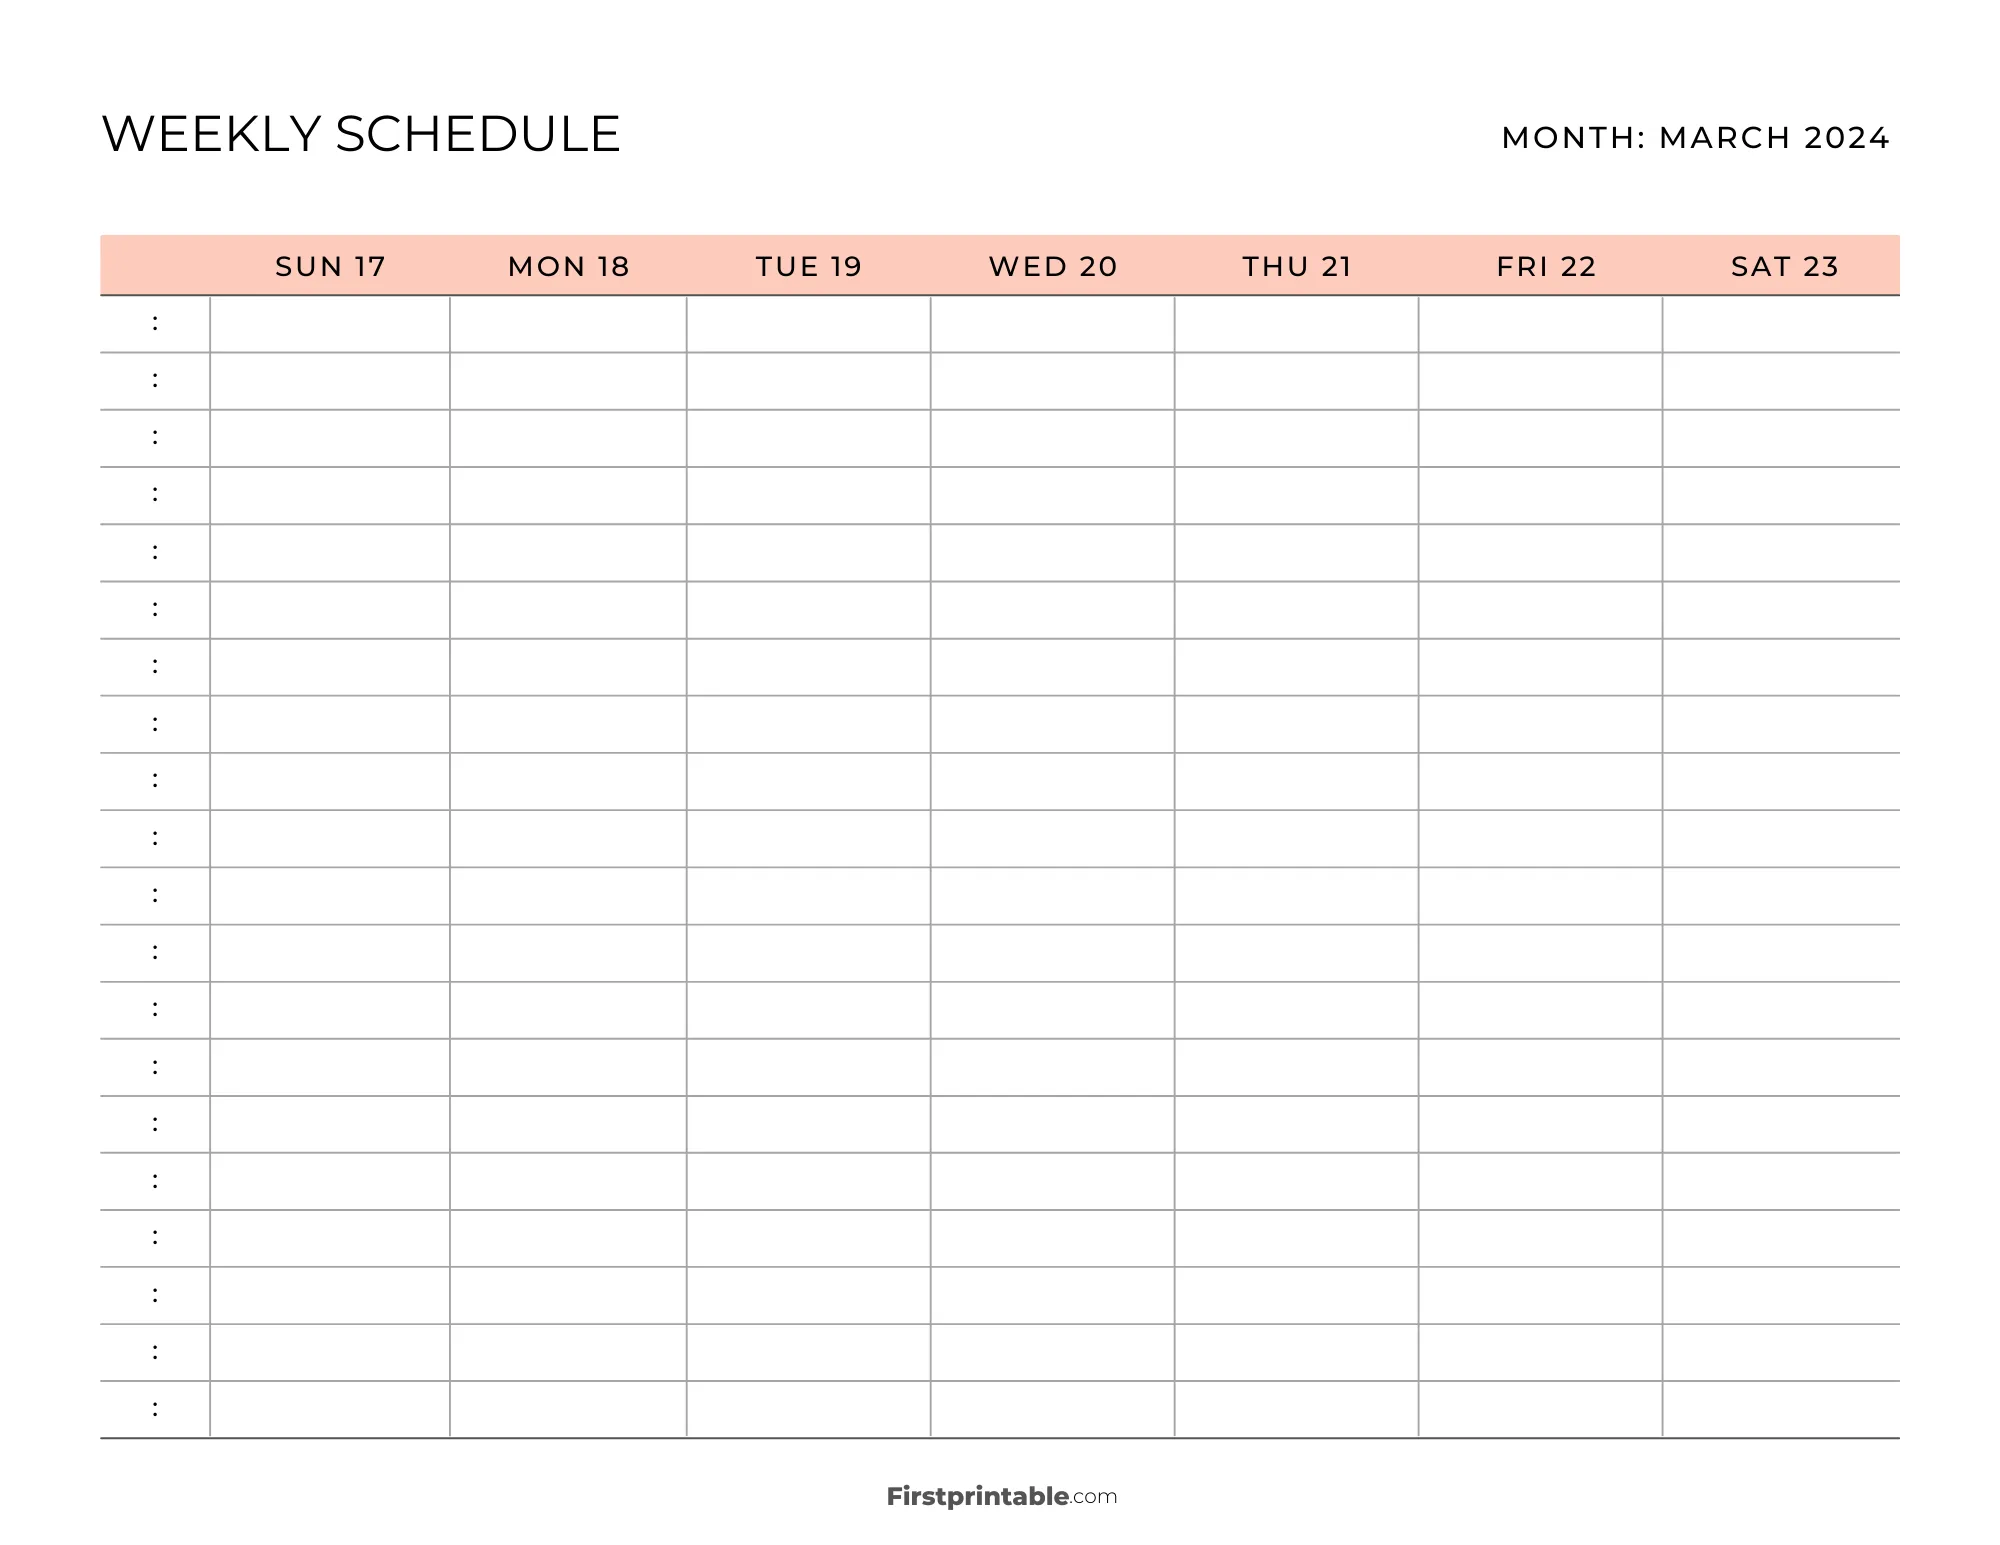 March 2024 Printable Weekly Schedule Template 01- Orange